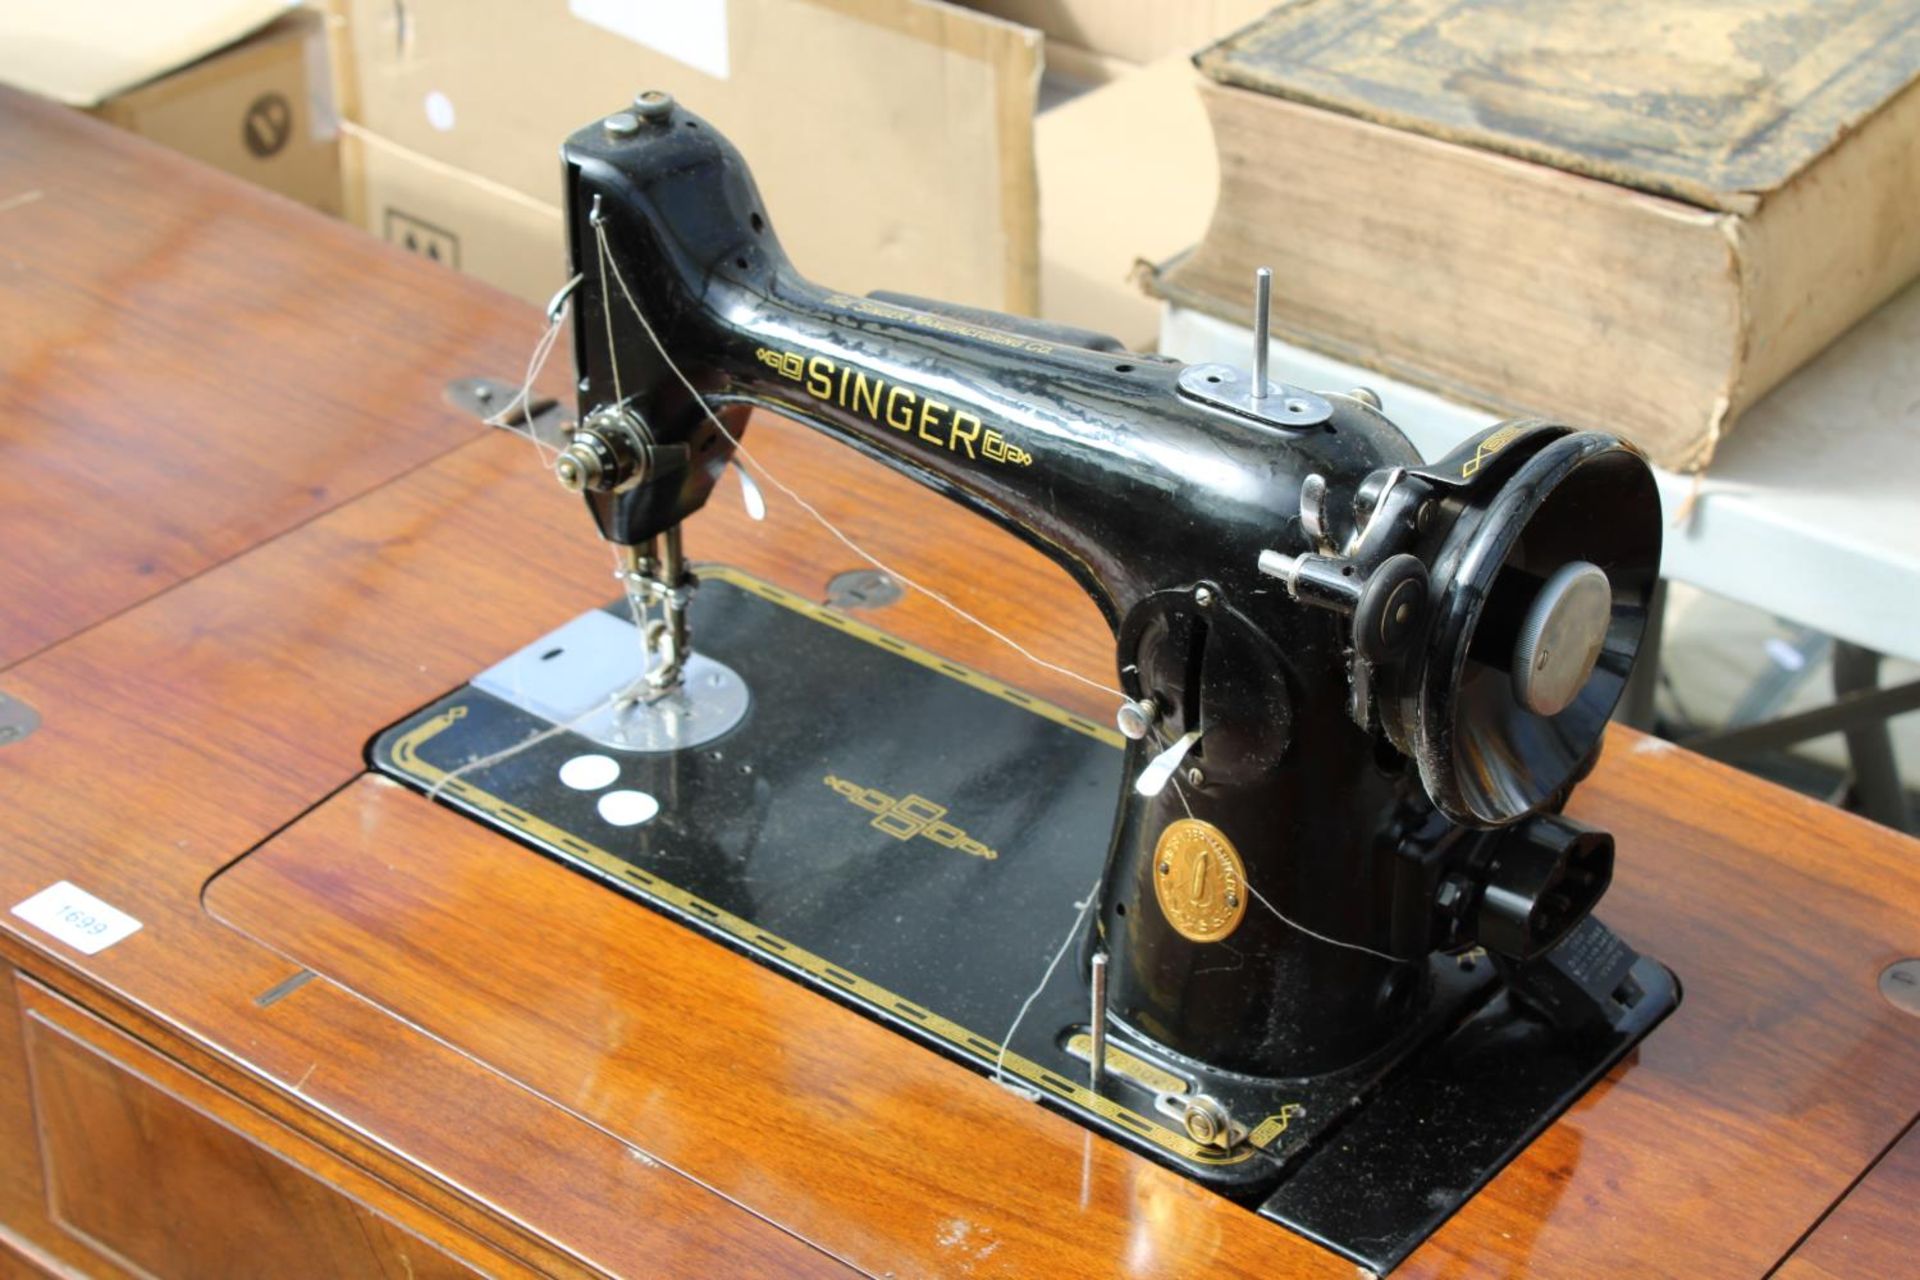 A VINTAGE SEWING TABLE WITH SINGER SEWING MACHINE BELIEVED IN WORKING ORDER BUT NO WARRANTY - Image 2 of 5